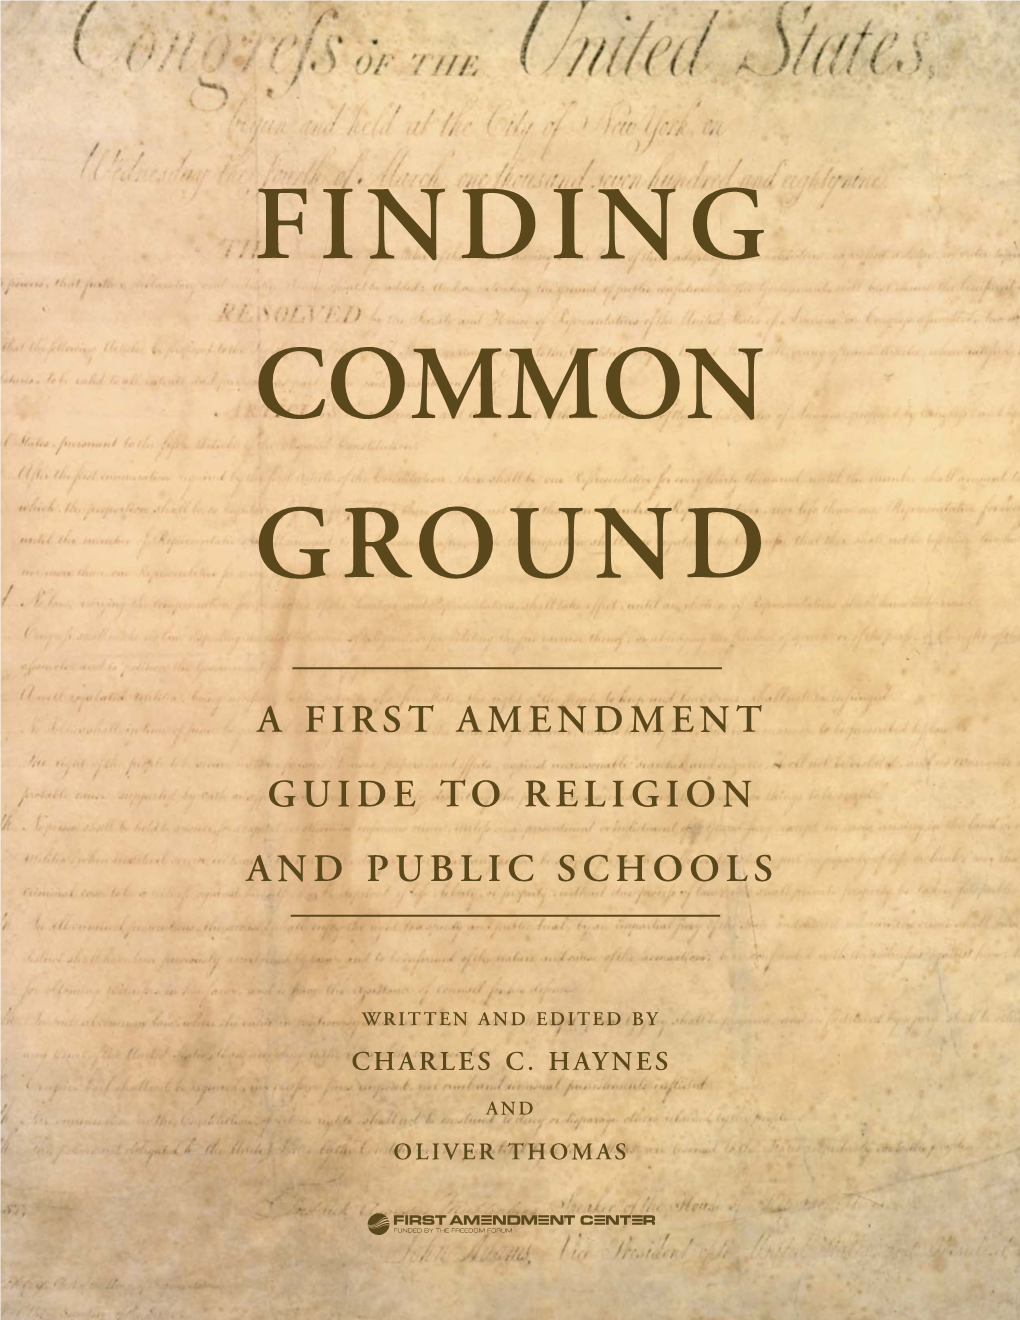 Finding Common Ground: a First Amendment Guide to Religion and Public Schools